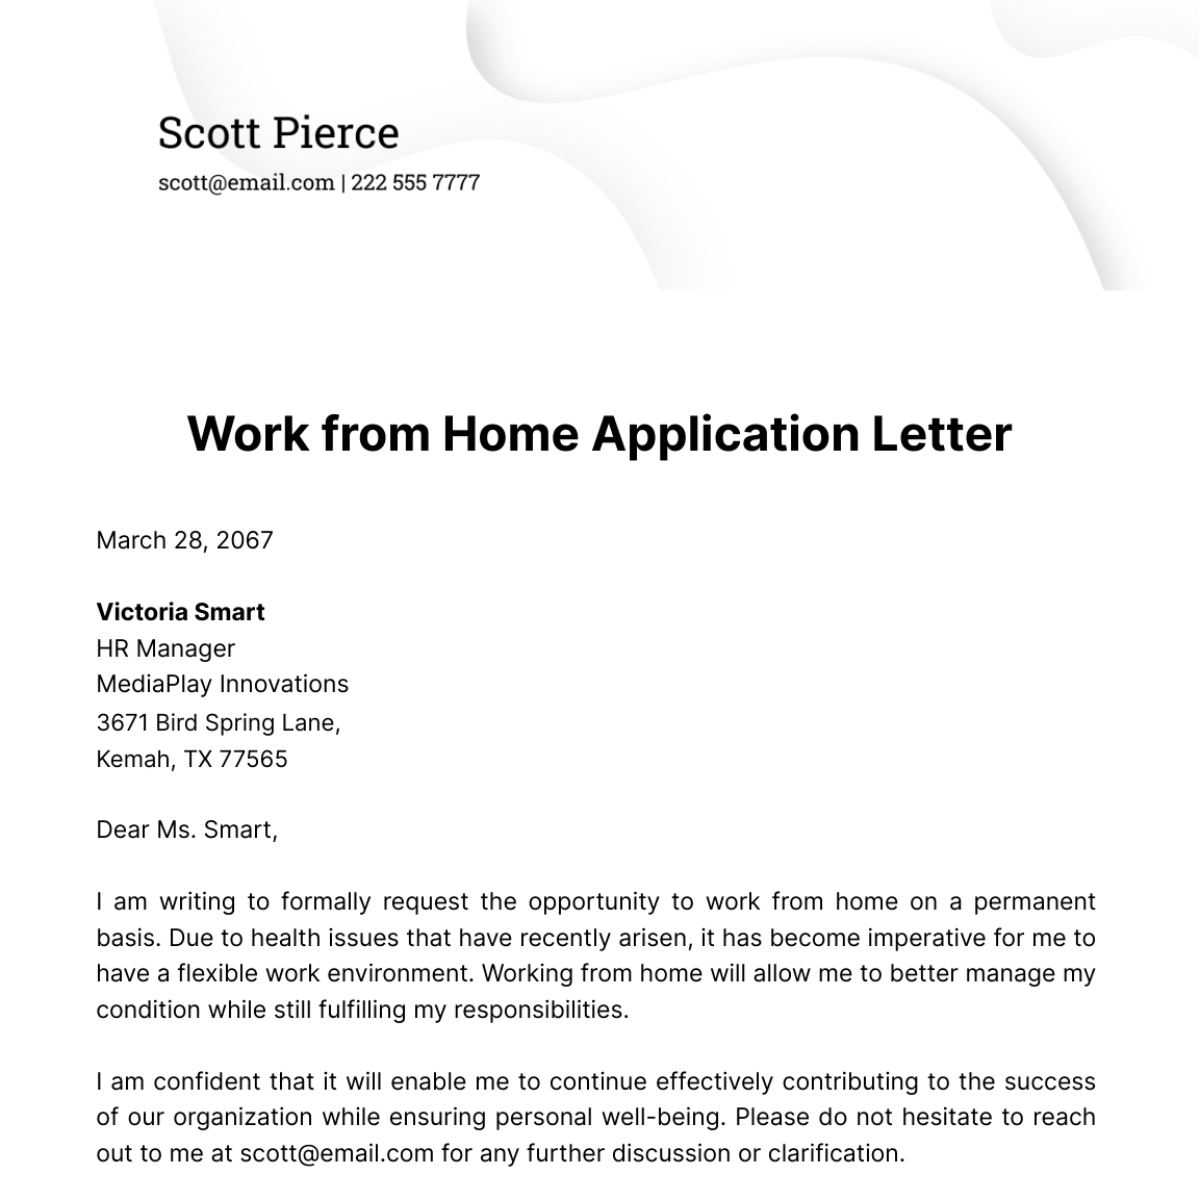 Work from Home Application Letter Template